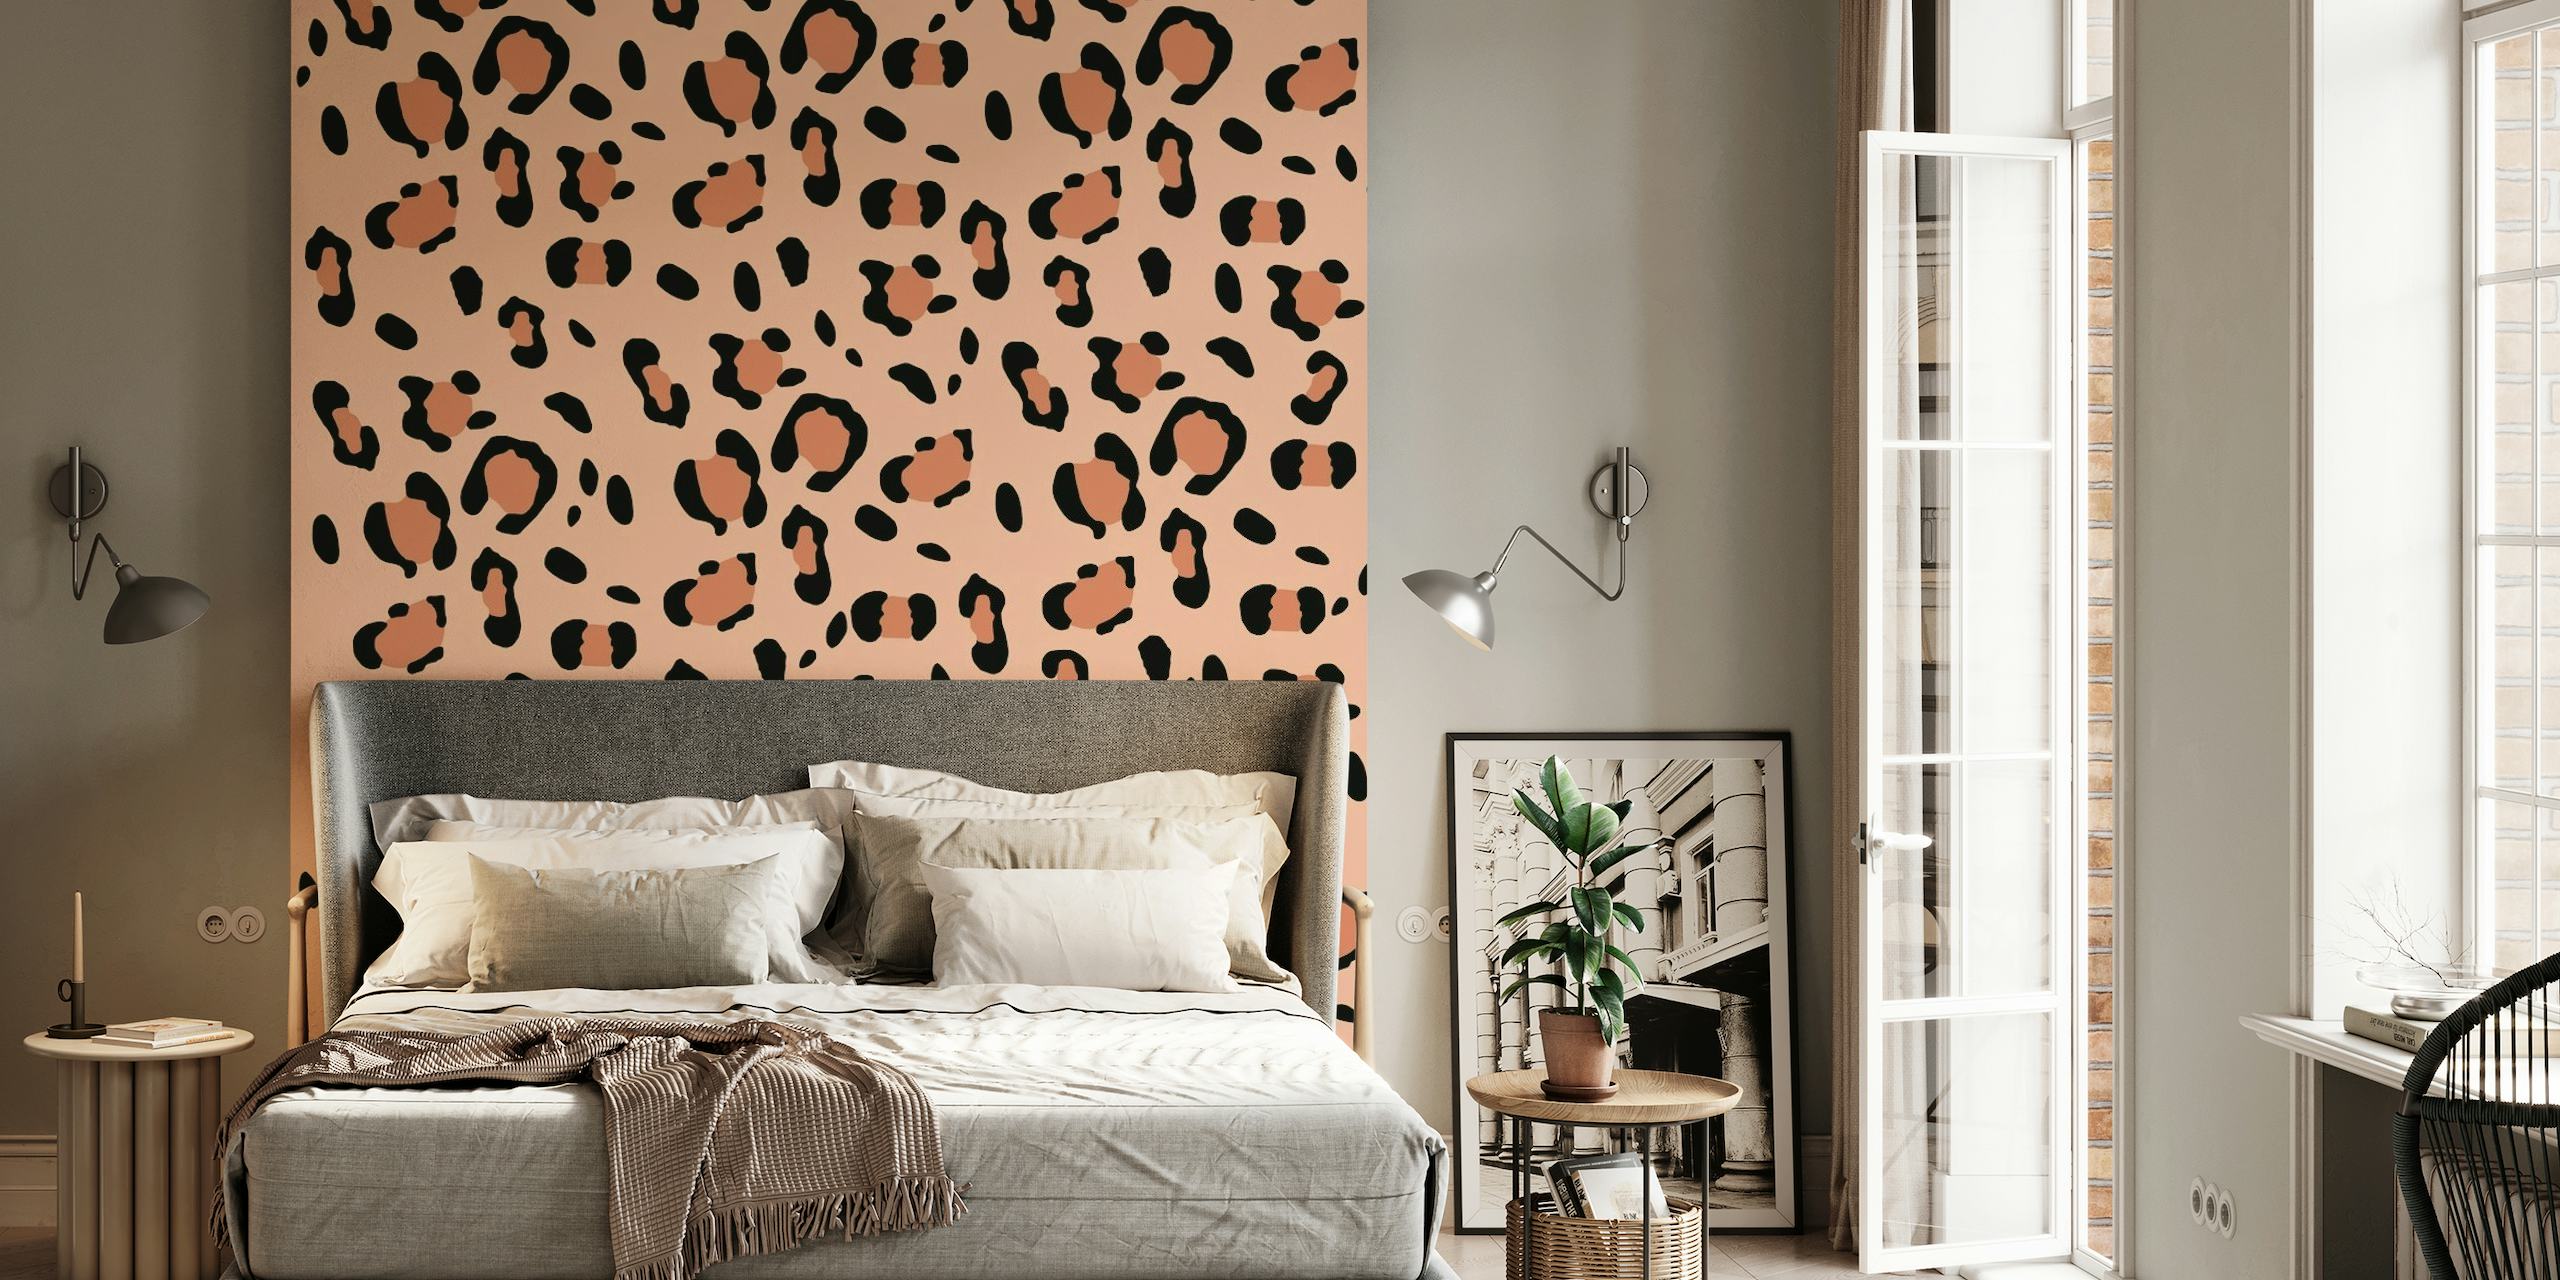 Leopard pattern wall mural with modern glam